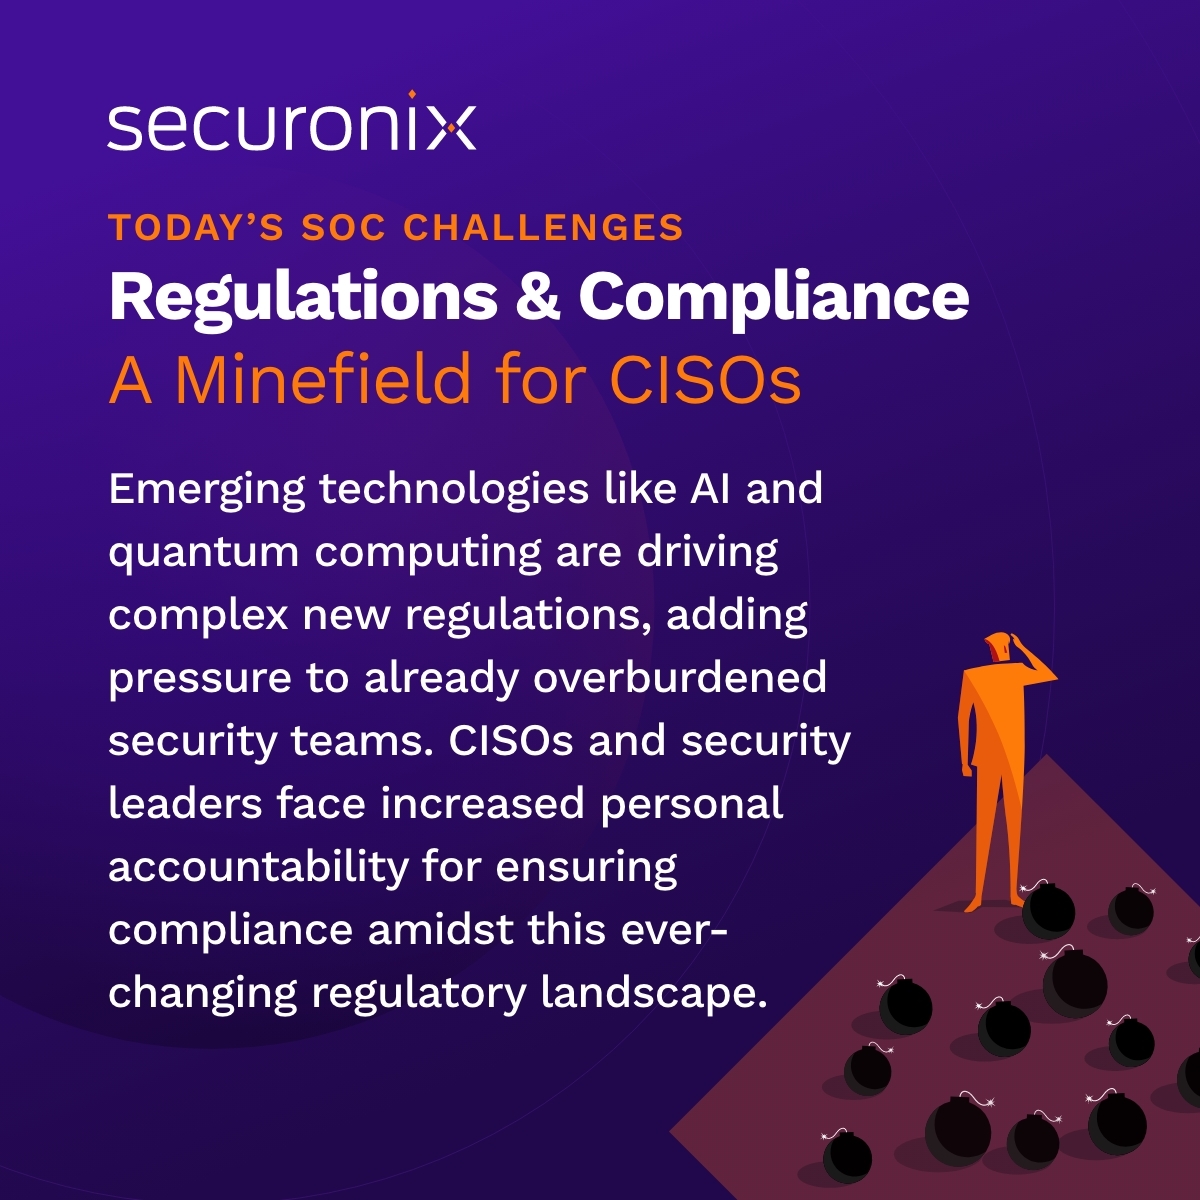 Are You Prepared to Navigate the Cybersecurity Regulatory Minefield? New technologies and the evolving threat landscape are driving complex regulations, adding pressure to overburdened security teams. The future of AI-Reinforced CyberOps arrives April 30th sc.securonix.com/u/v5a6YI